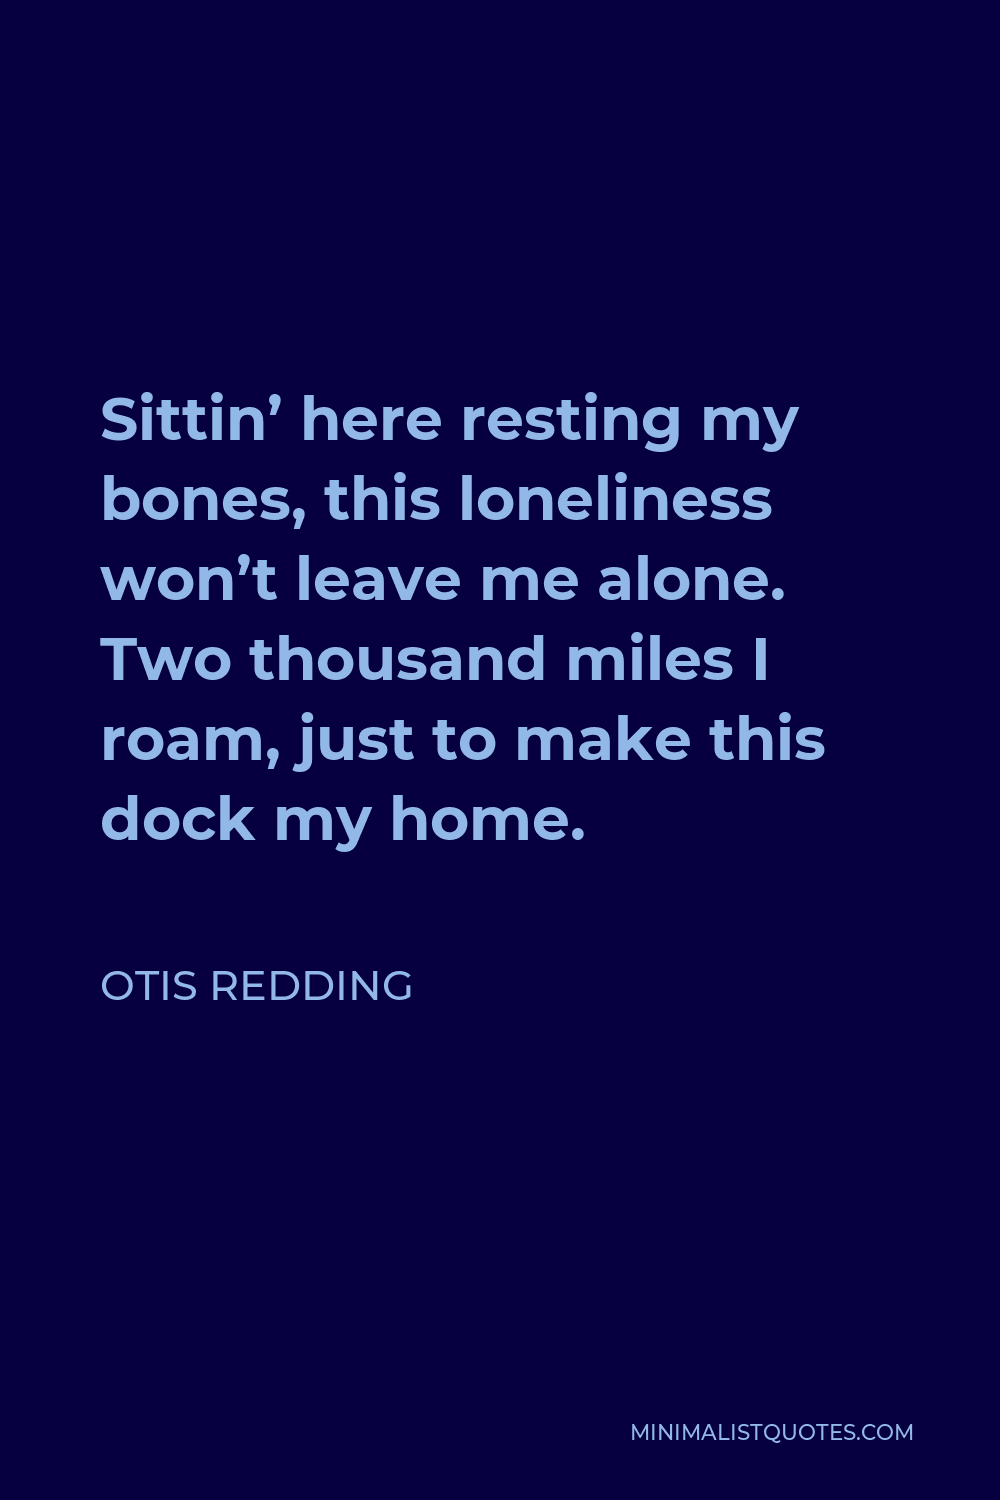 Otis Redding Quote - Sittin’ here resting my bones, this loneliness won’t leave me alone. Two thousand miles I roam, just to make this dock my home.